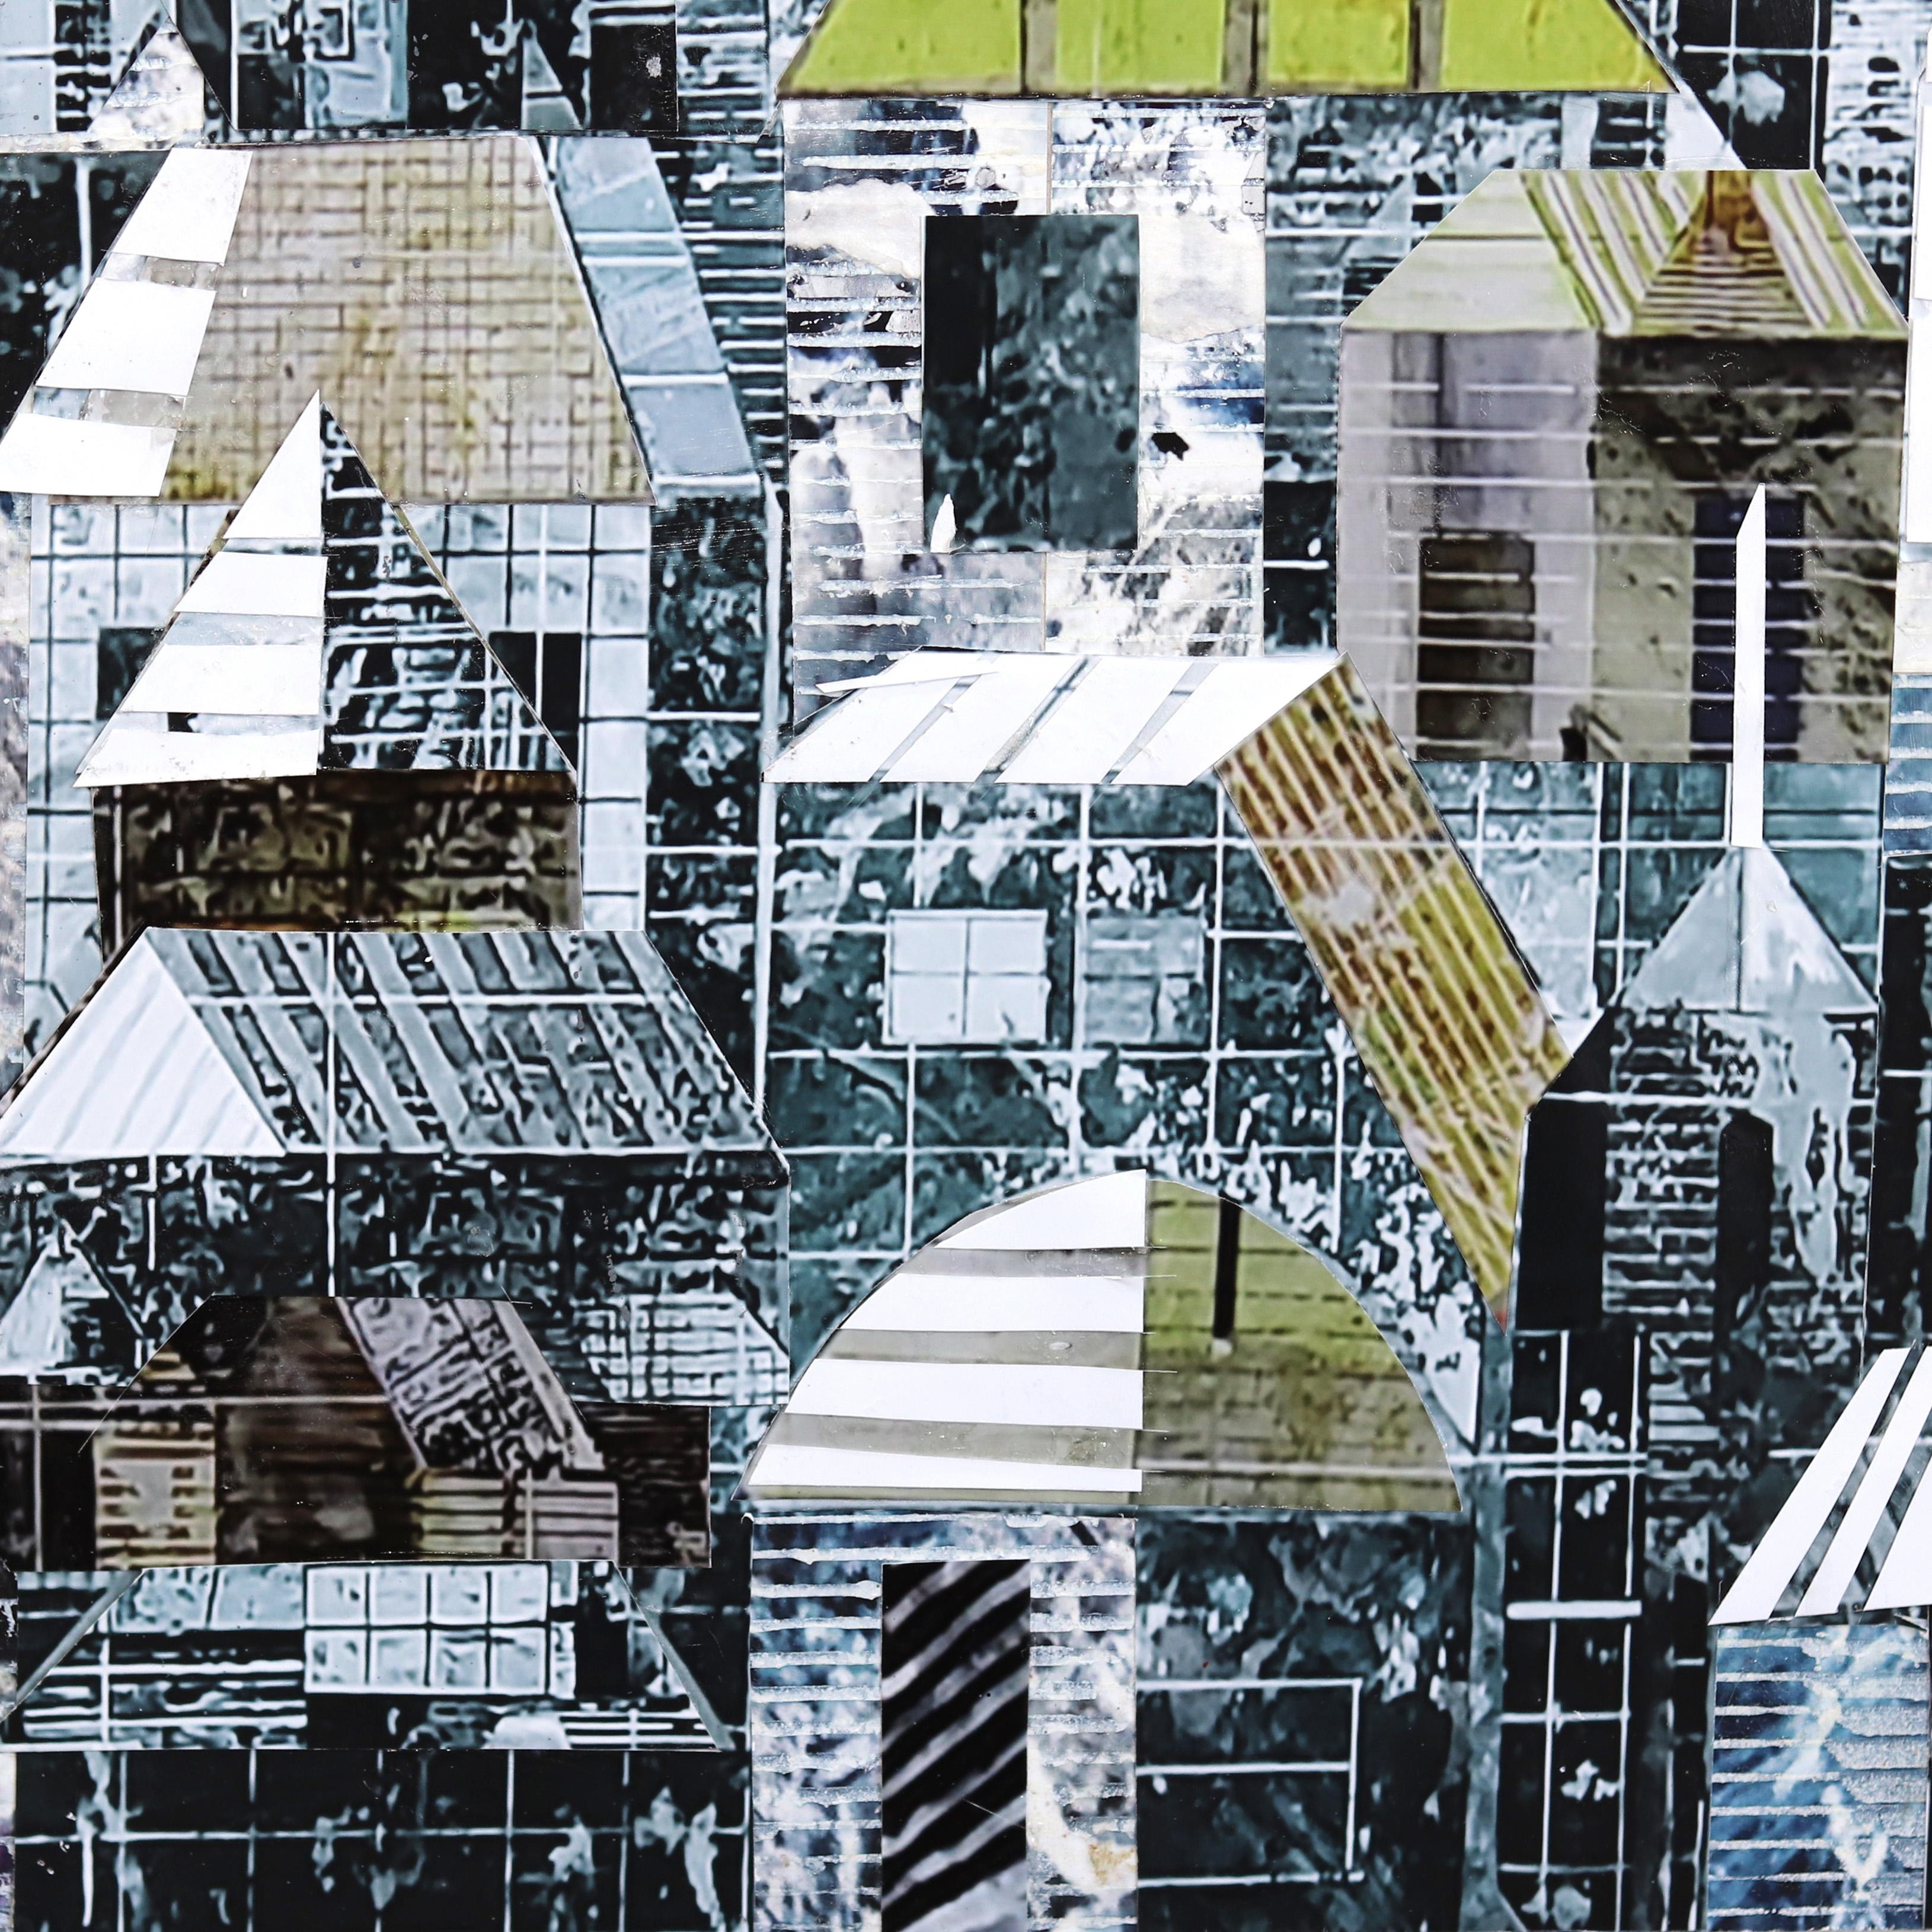 Sublime 230 - Original Urban Landscape Photographic Collage Artwork - Gray Abstract Painting by Tae Ho Kang